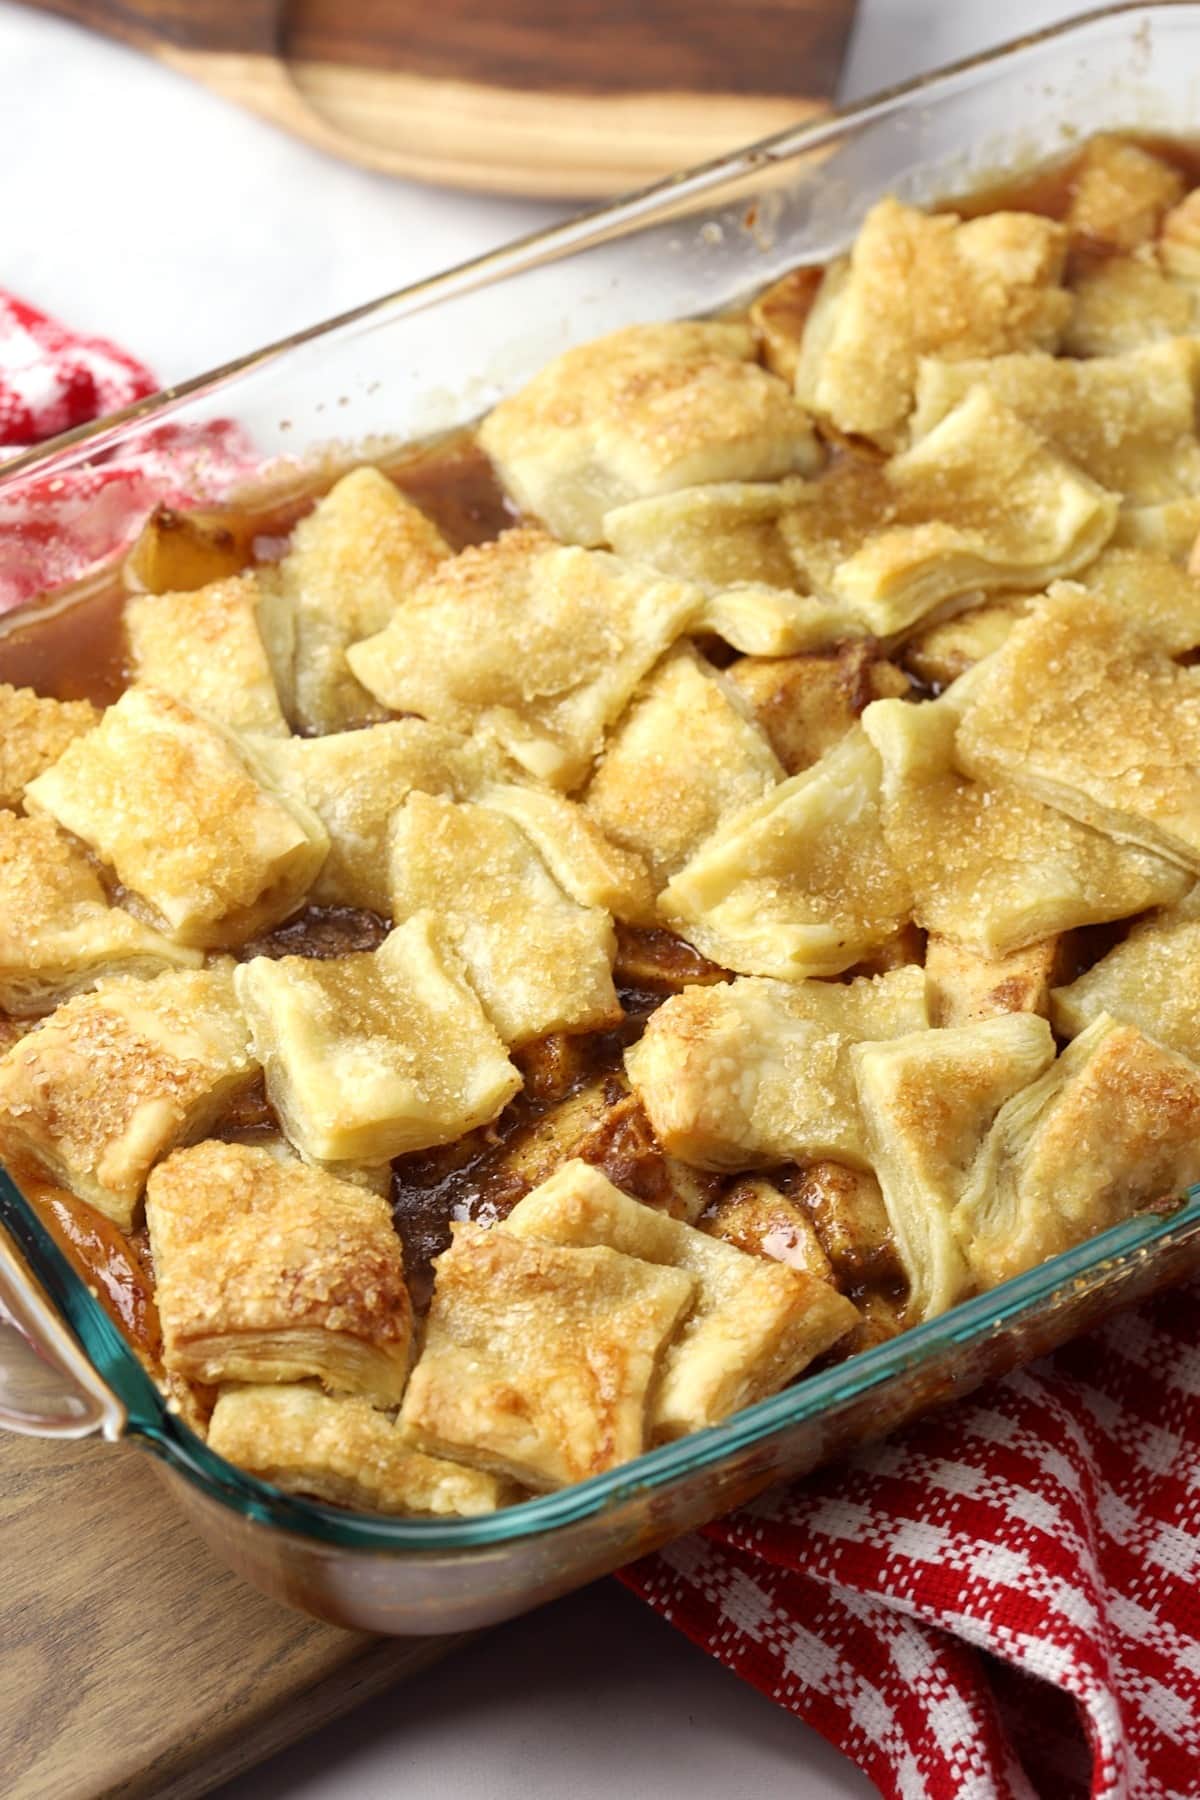 Apple pie in a glass baking dish, with golden crust and bubbling filling, ready to be served.